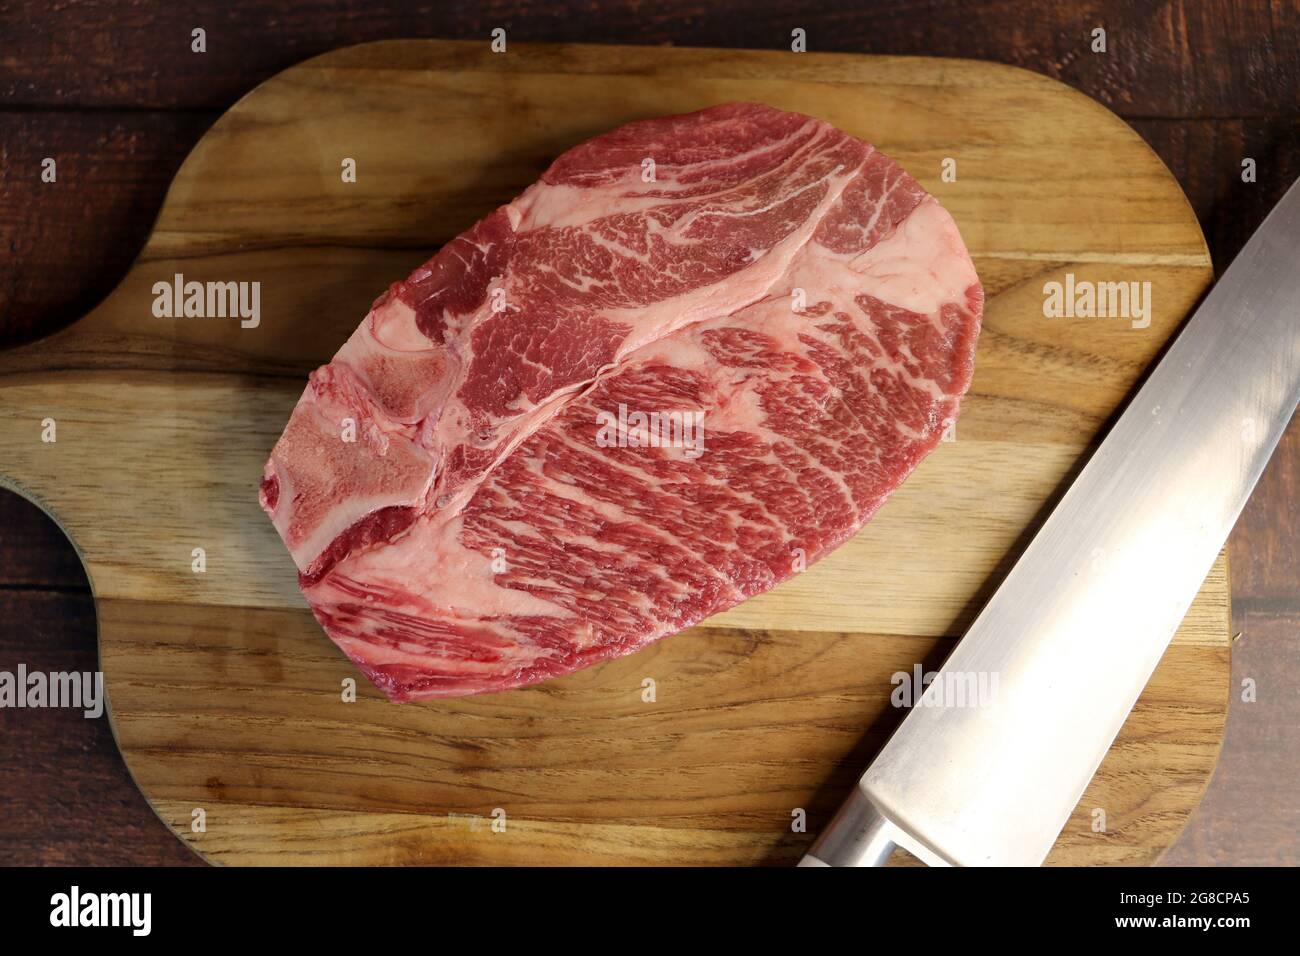 Short Rib or Costela Premium.  Beautiful raw steak under a wooden board on a wooden background. For a brazilian barbecue. Stock Photo